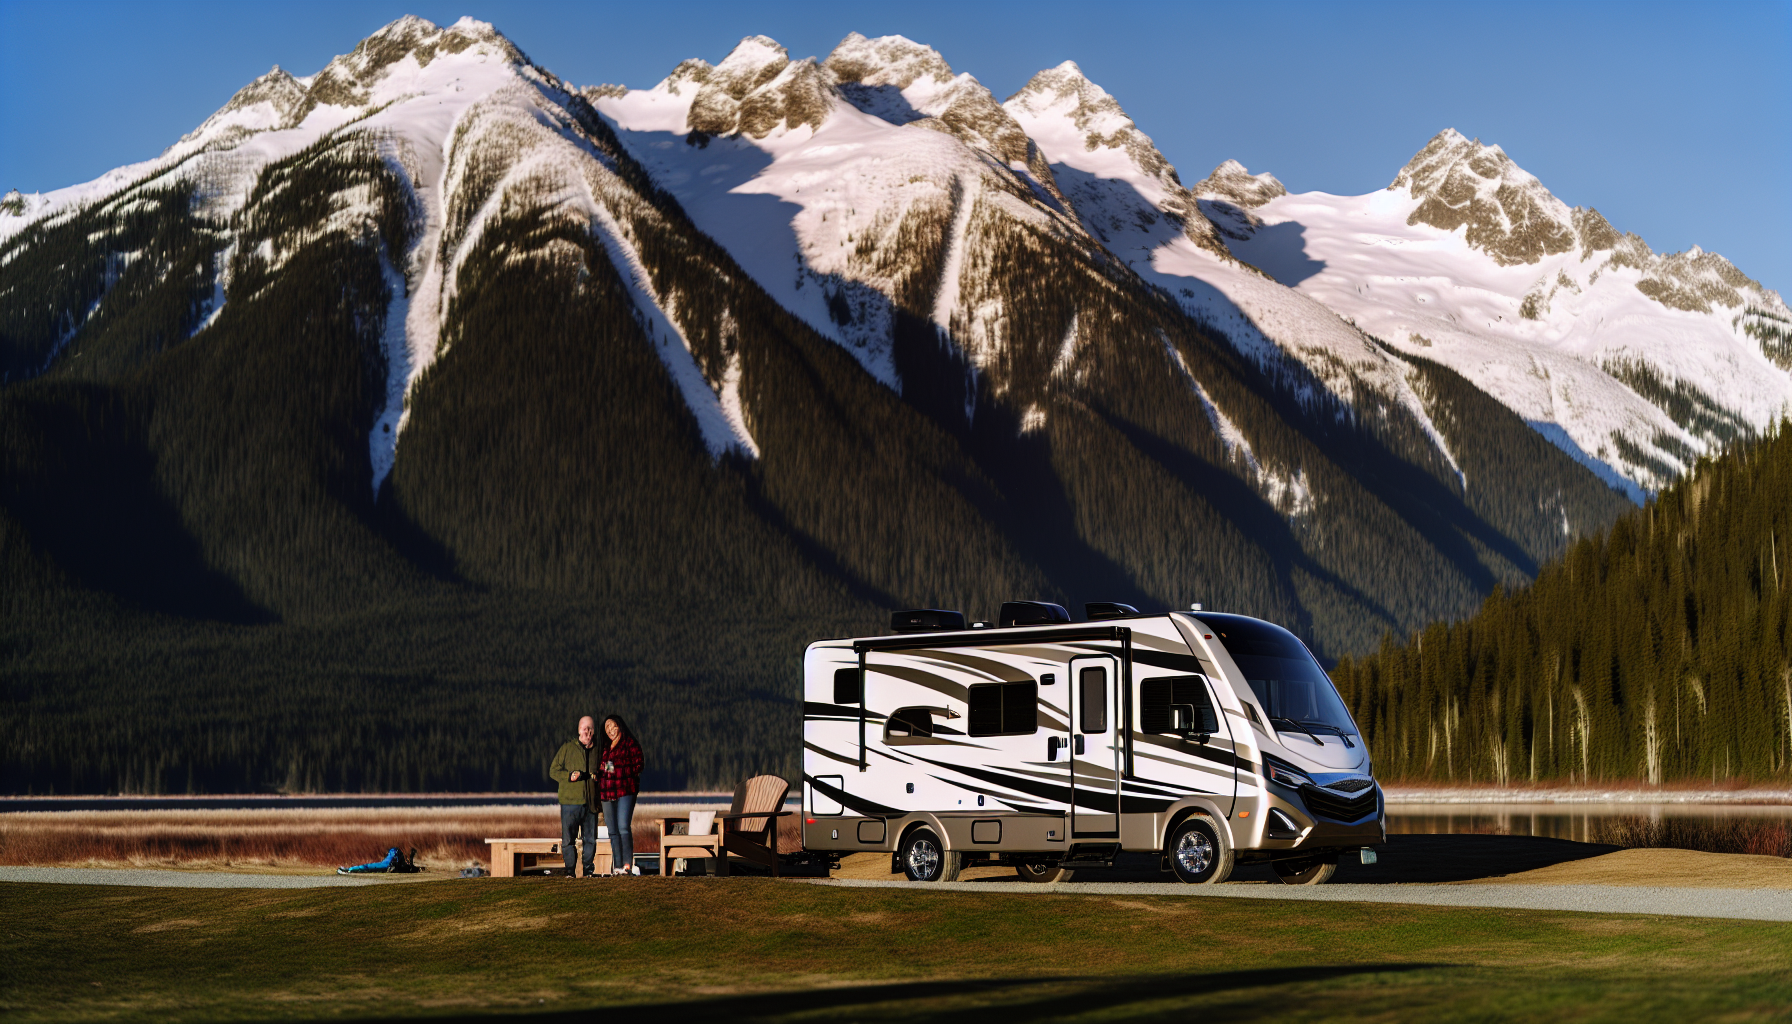 RV parked in a scenic location with mountains in the background